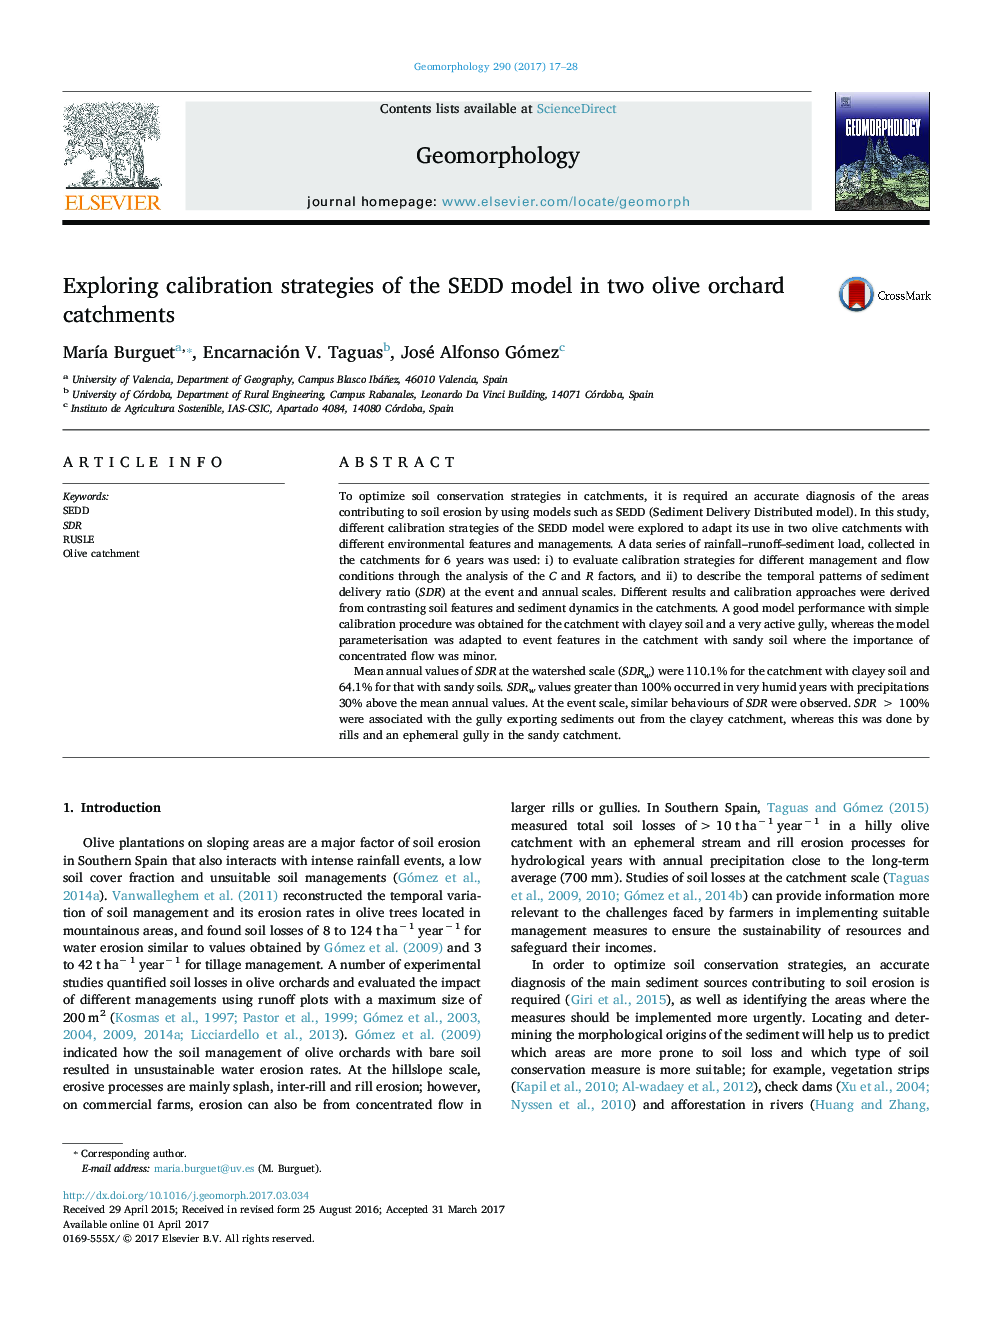 Exploring calibration strategies of the SEDD model in two olive orchard catchments